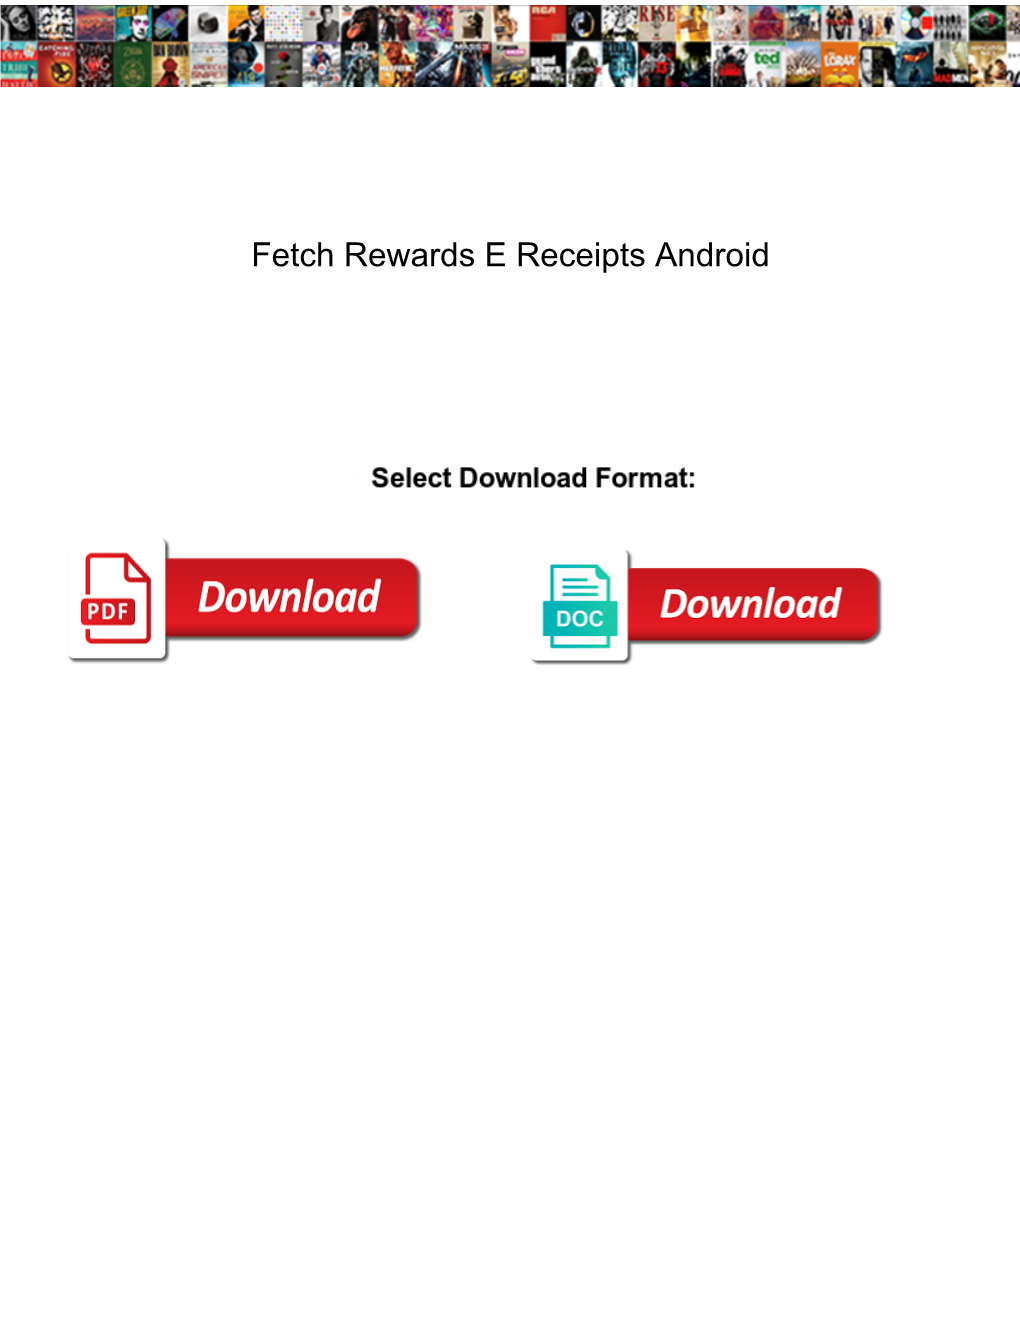 Fetch Rewards E Receipts Android